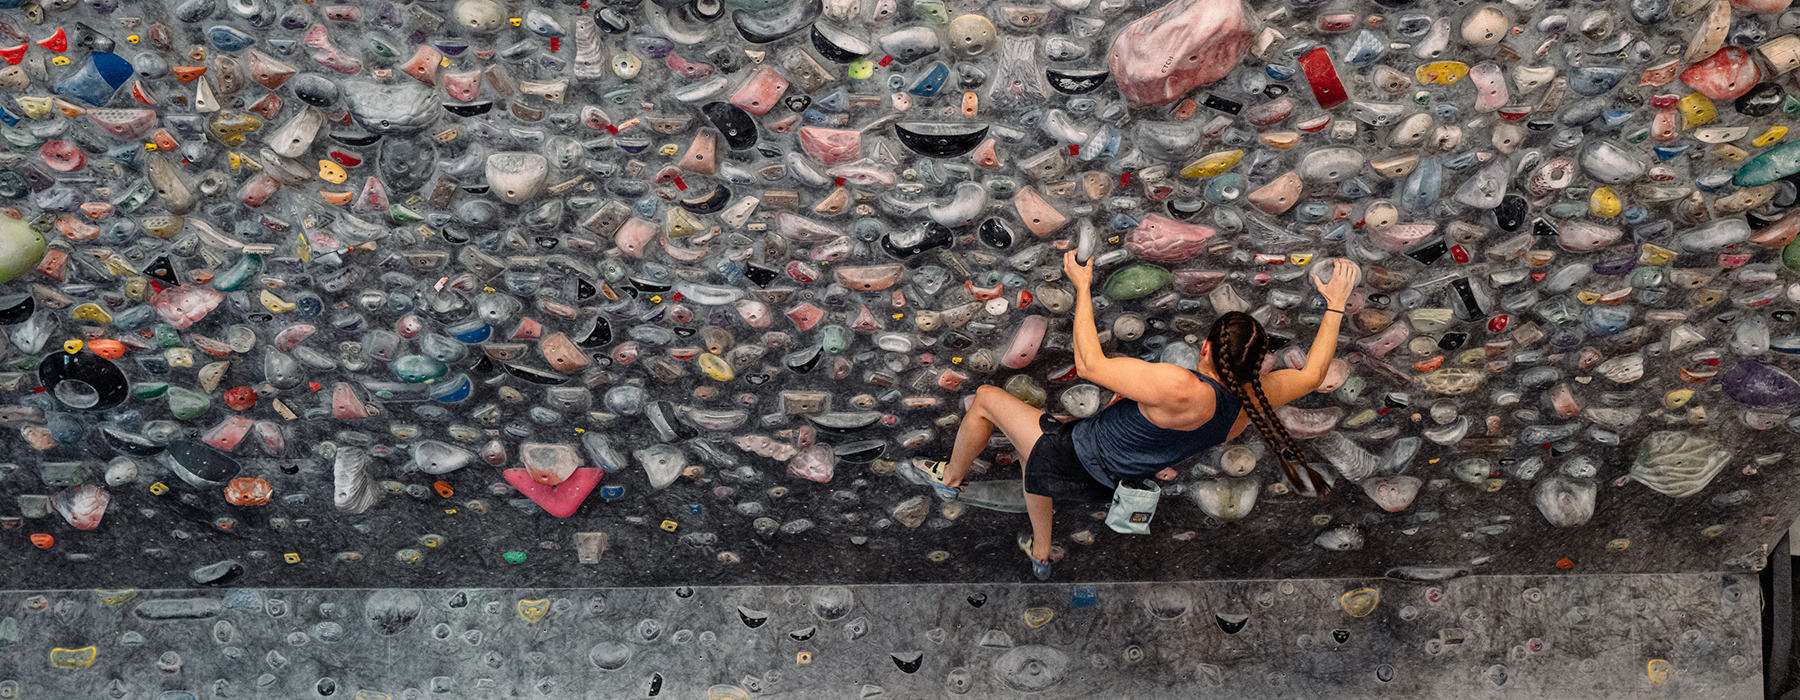 Kyra Condie climbing on a bouldering problem in a climbing gym.
